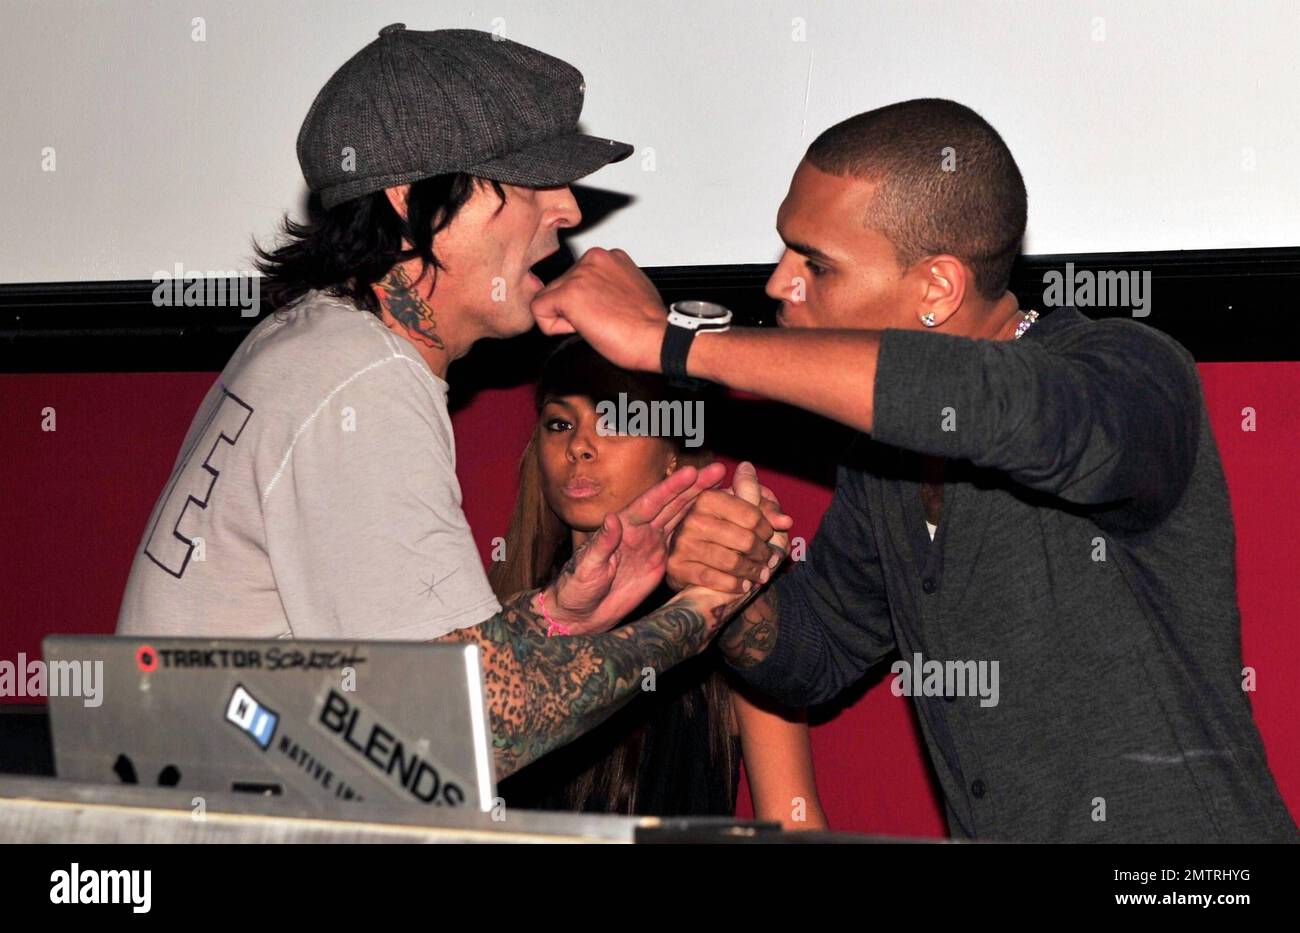 EXCLUSIVE!! Tommy Lee and Chris Brown share the stage and show admiration  for one another as Chris hosts the Super Bowl Celebrity DJ Bash with T-Pain  at Play Nightclub in Miami Beach,